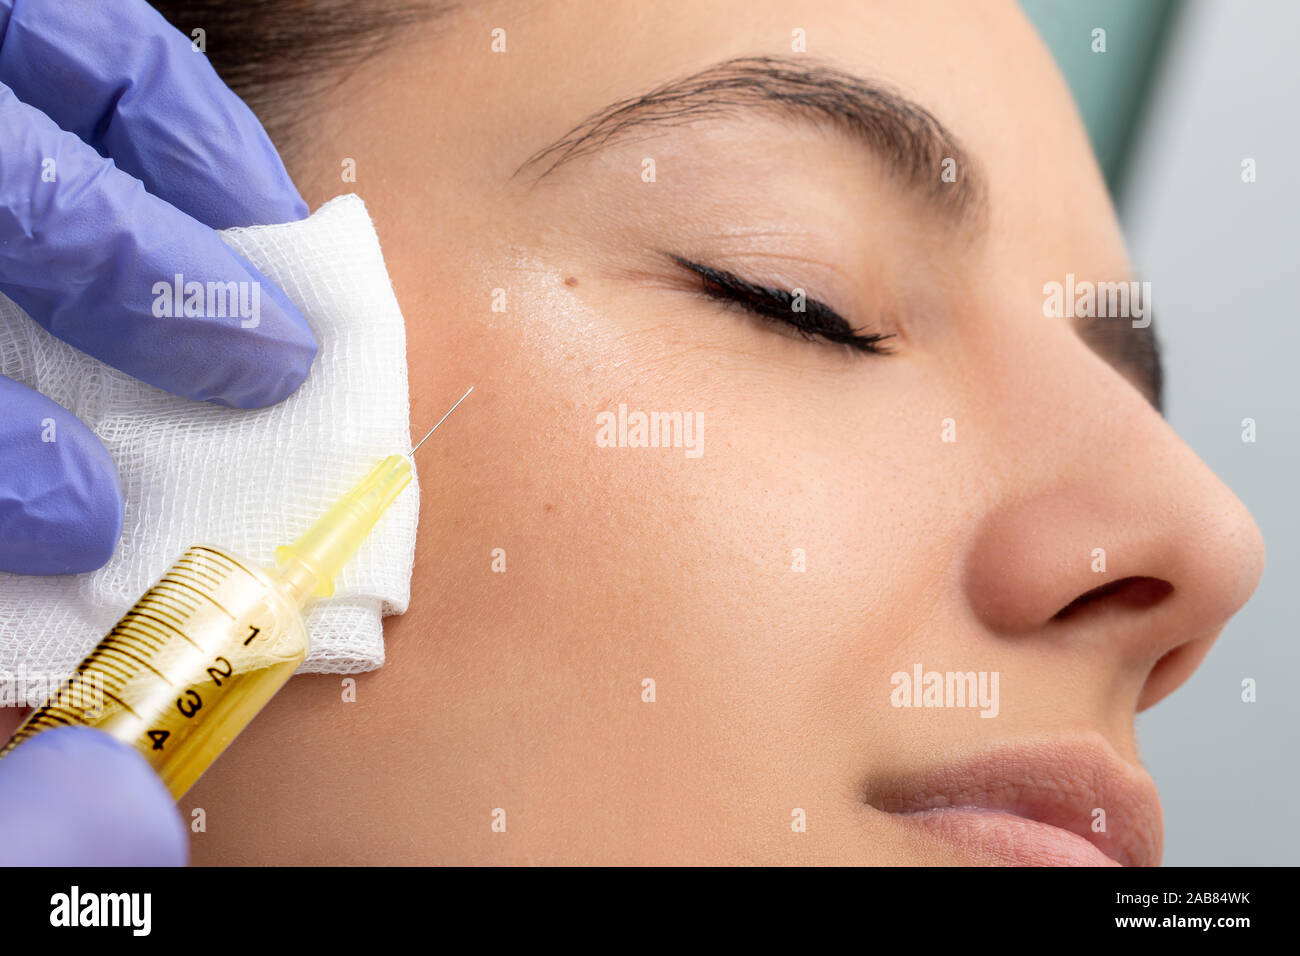 Macro close up of syringe with needle next to woman's face. Therapist doing cosmetic hormone treatment on girl. Stock Photo